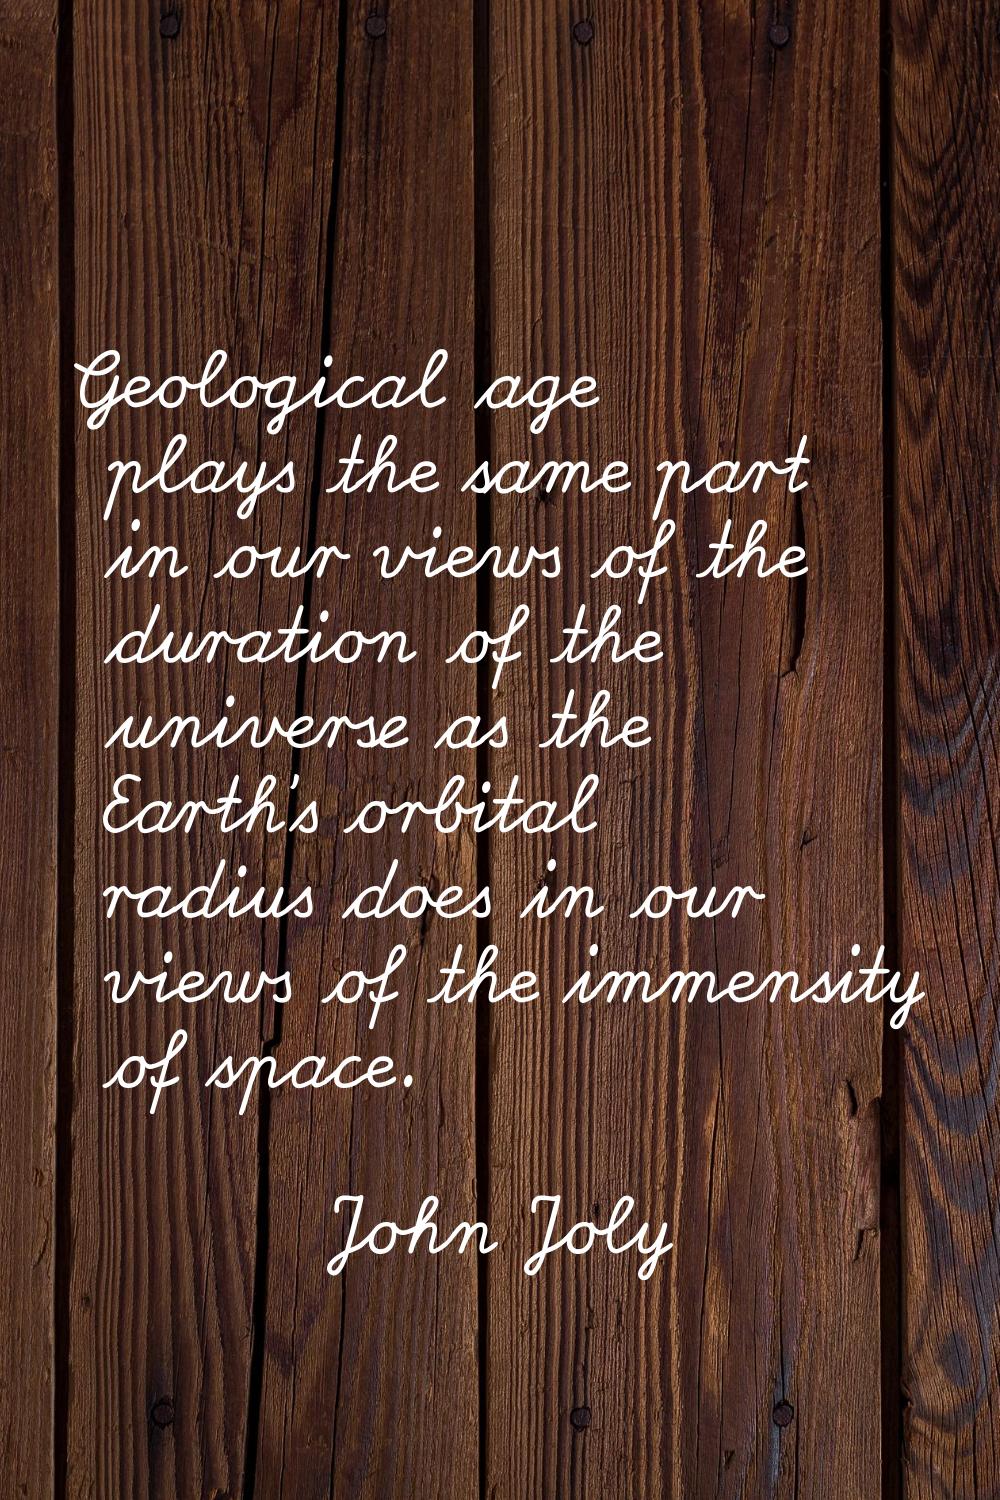 Geological age plays the same part in our views of the duration of the universe as the Earth's orbi